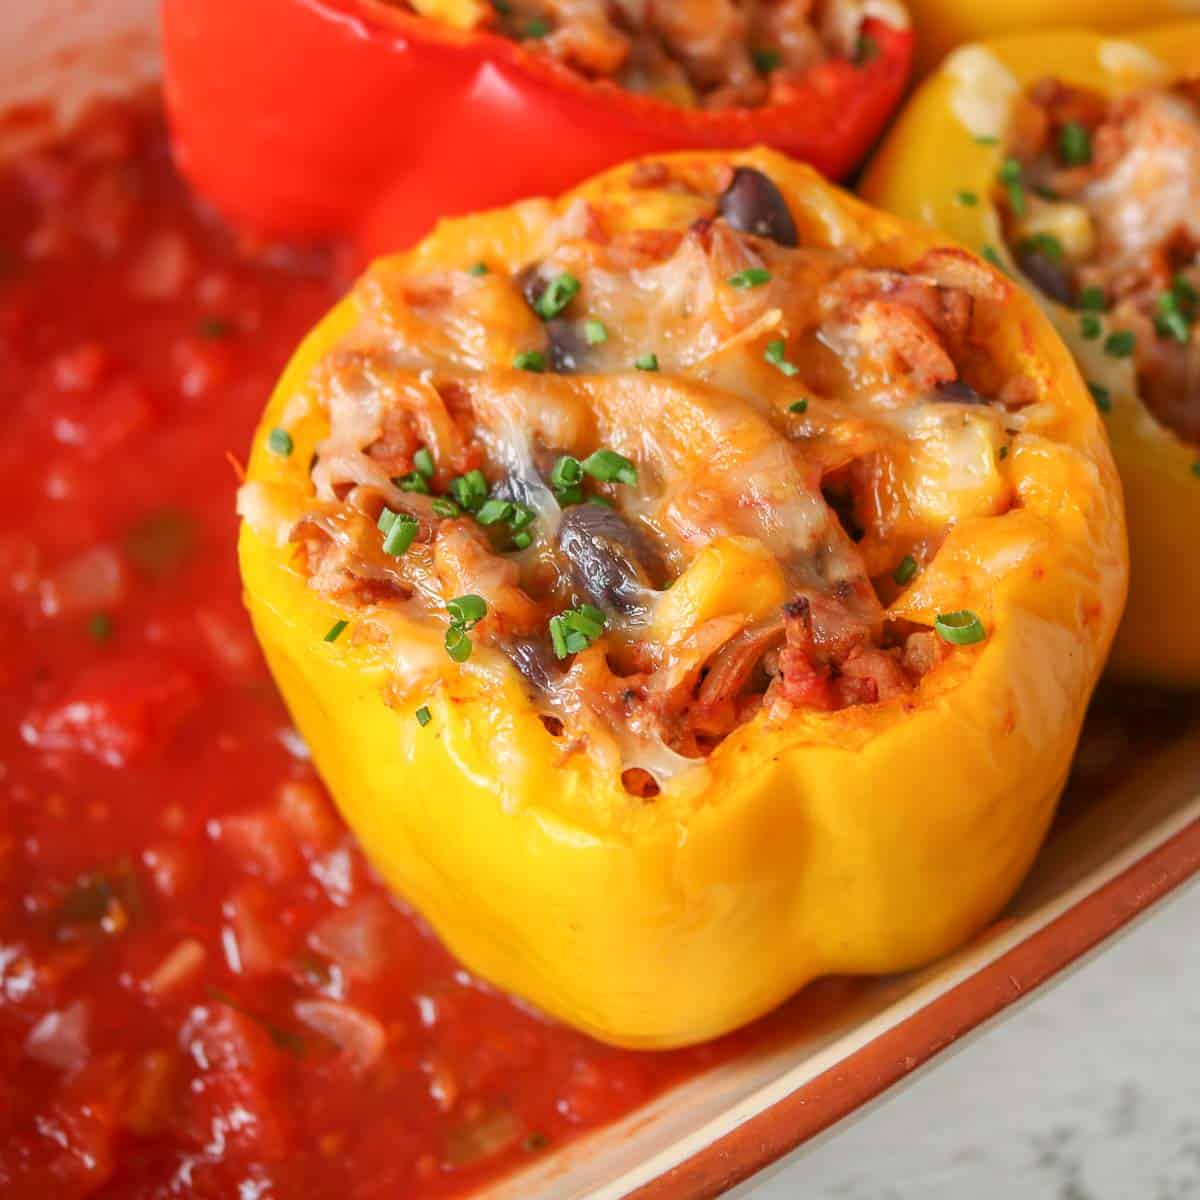 Close-up of a stuffed pepper in a baking dish garnished with chives.